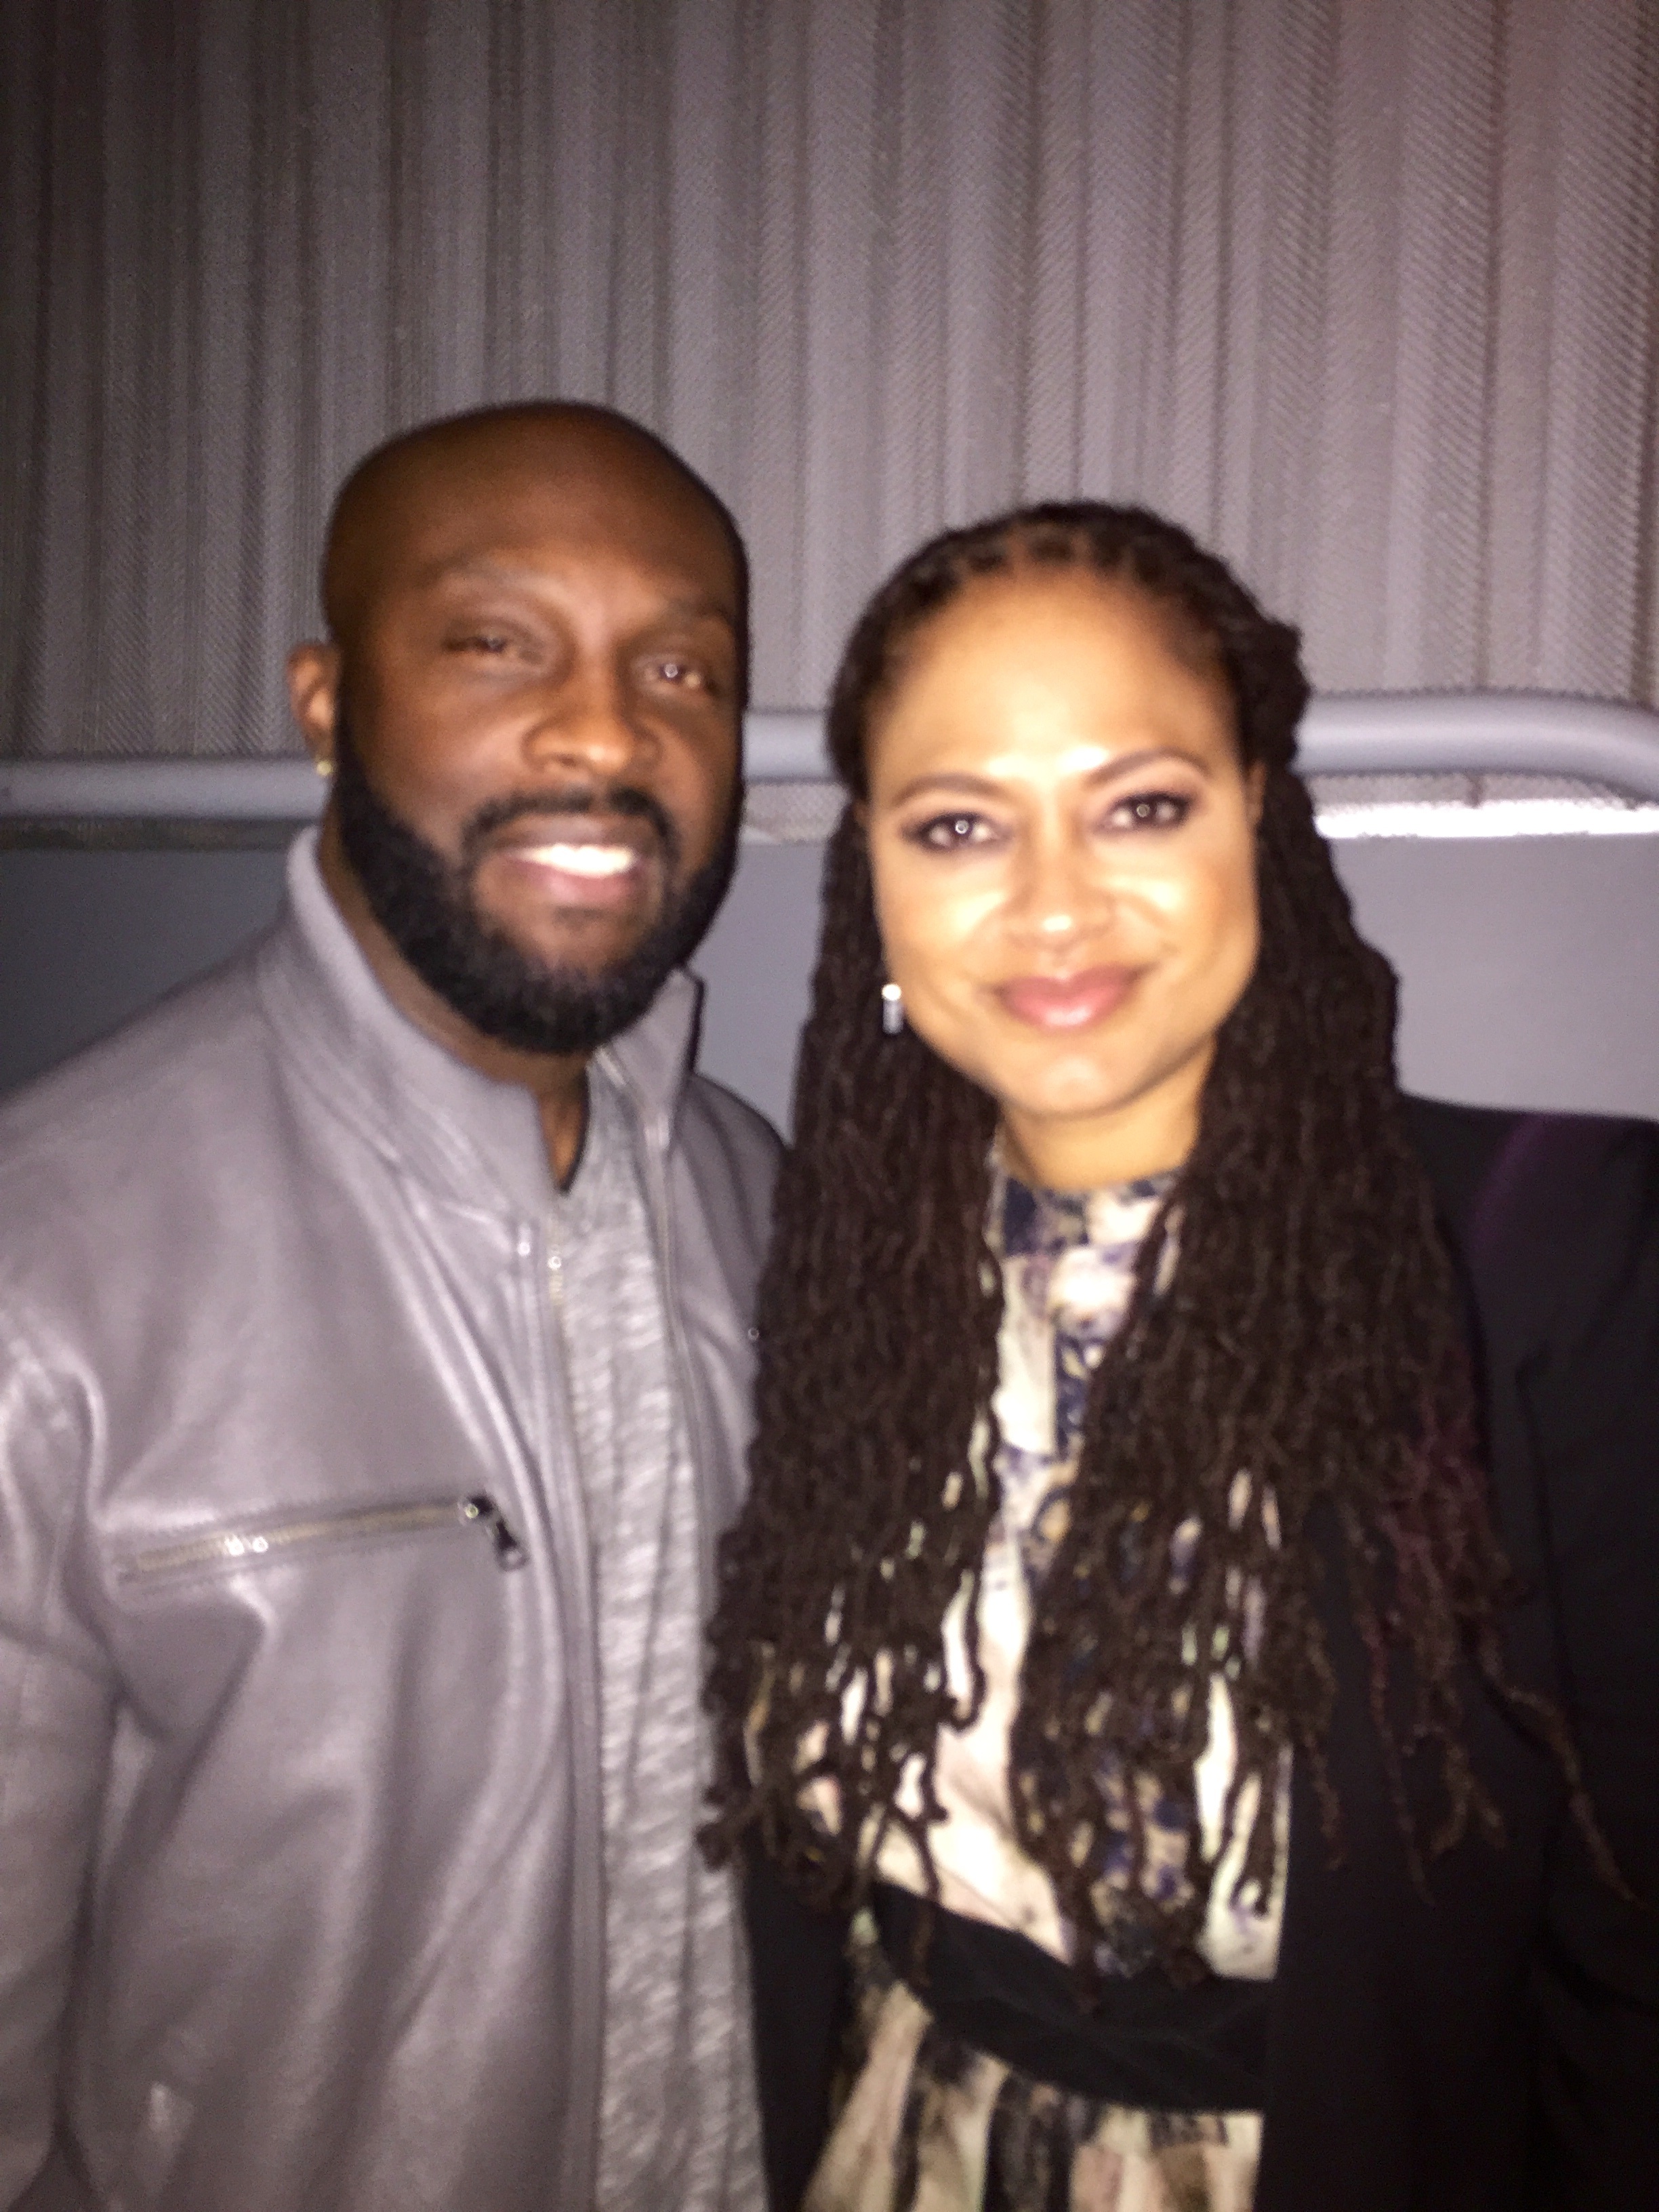 Ro Brooks and Director Ava Duvernay @ the screening of her new film 